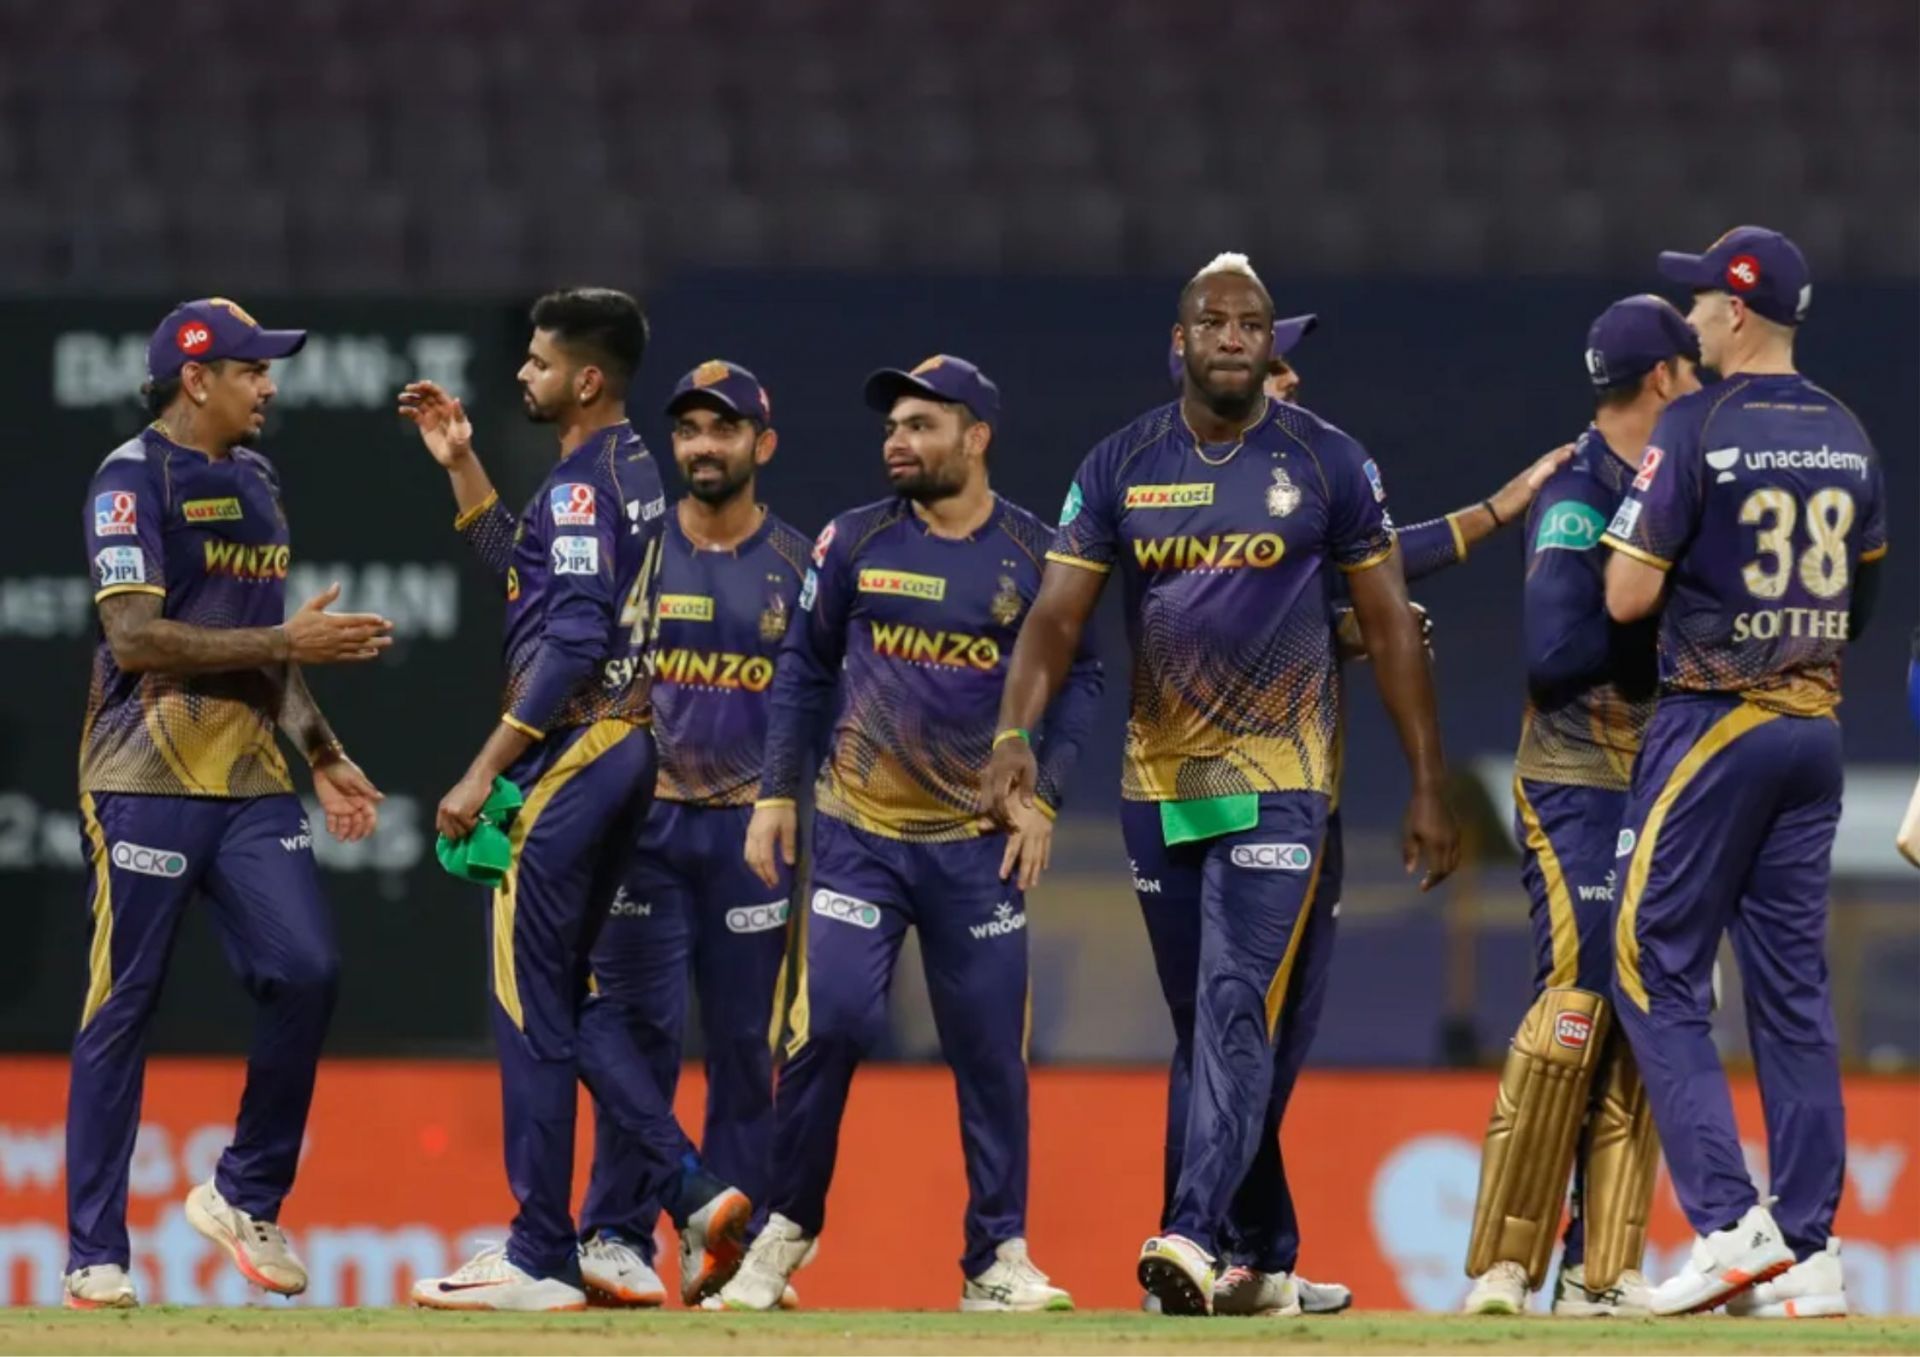 Kolkata Knight Riders will look to better their seventh-placed finish last season and go better in 2023 (Picture Credits: IPL).